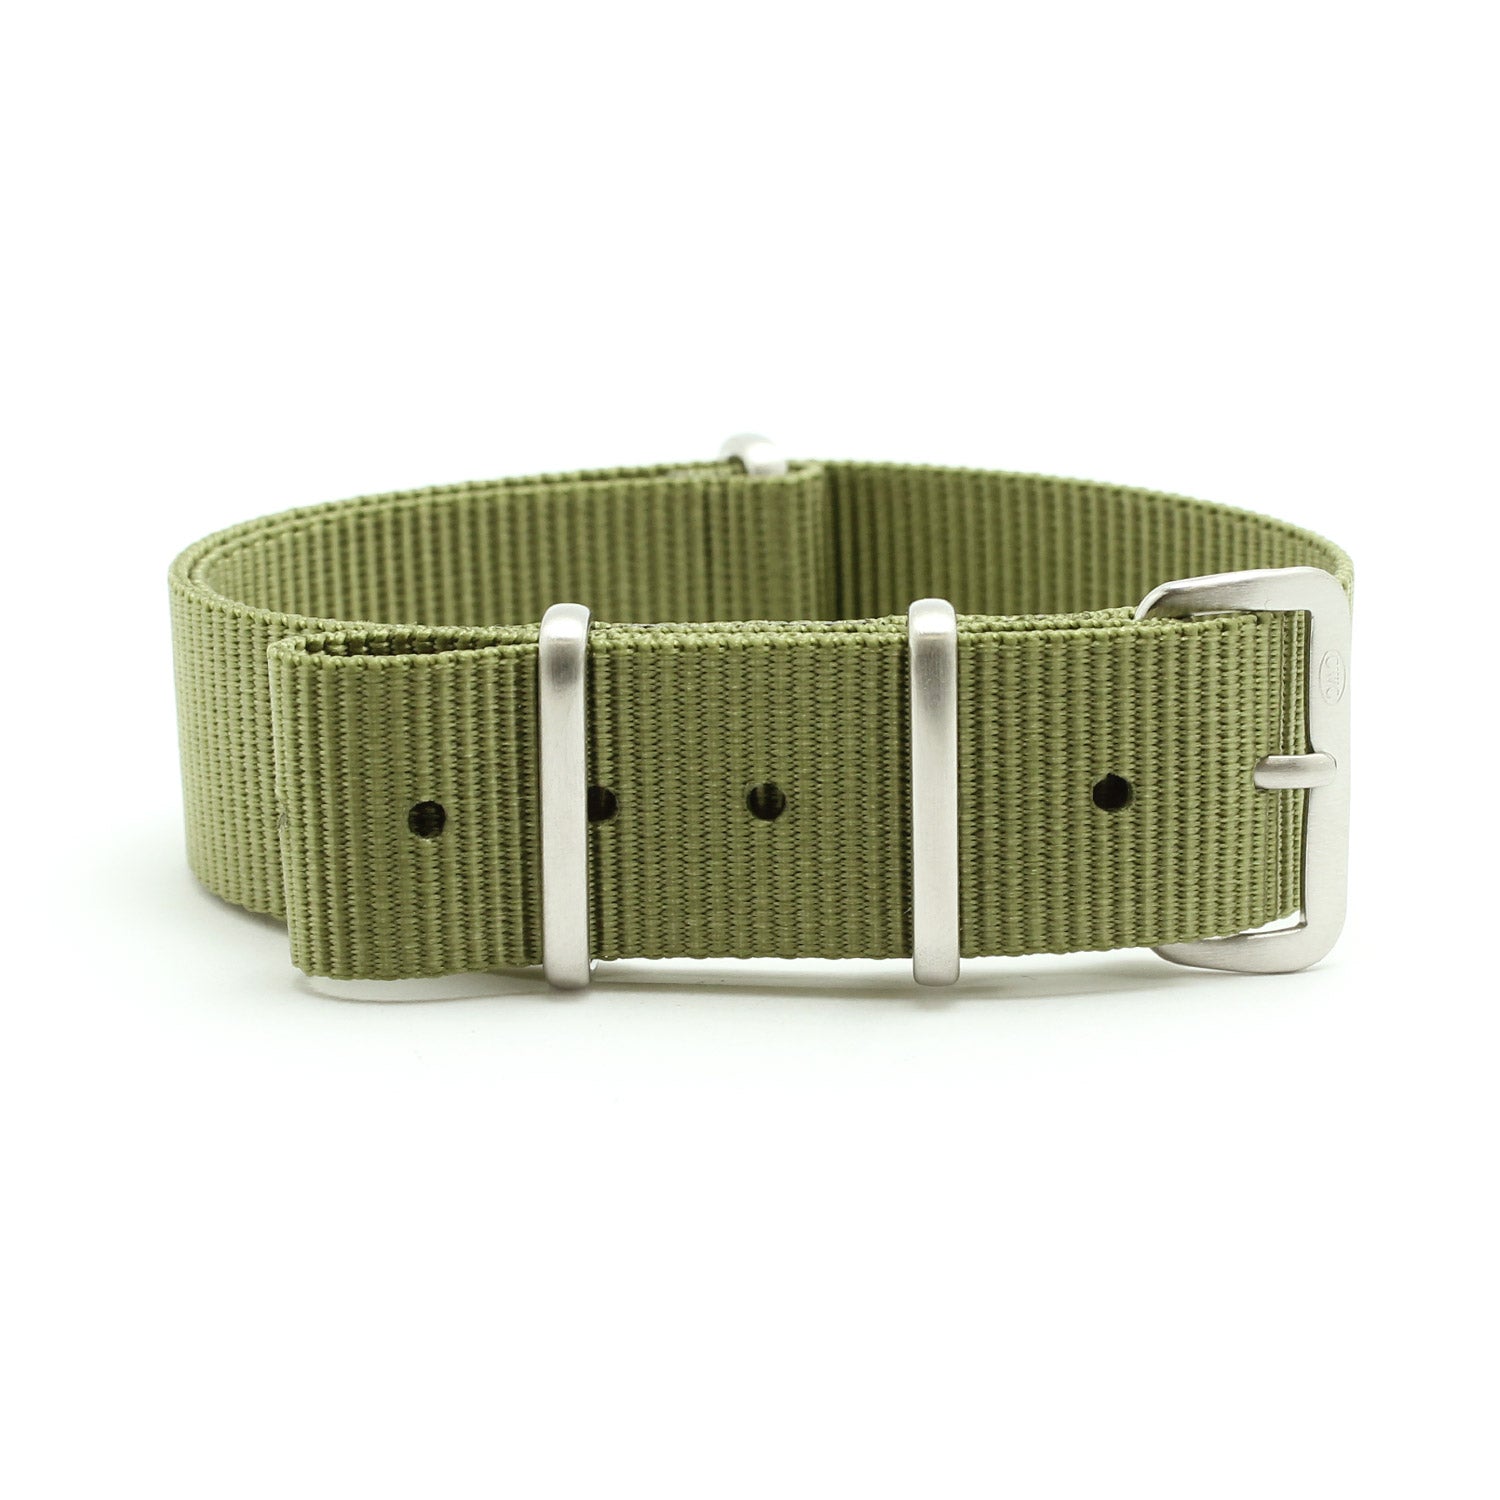 CABOT MILITARY WATCH STRAP - LIGHT GREEN WITH MATTE SILVER BUCKLE